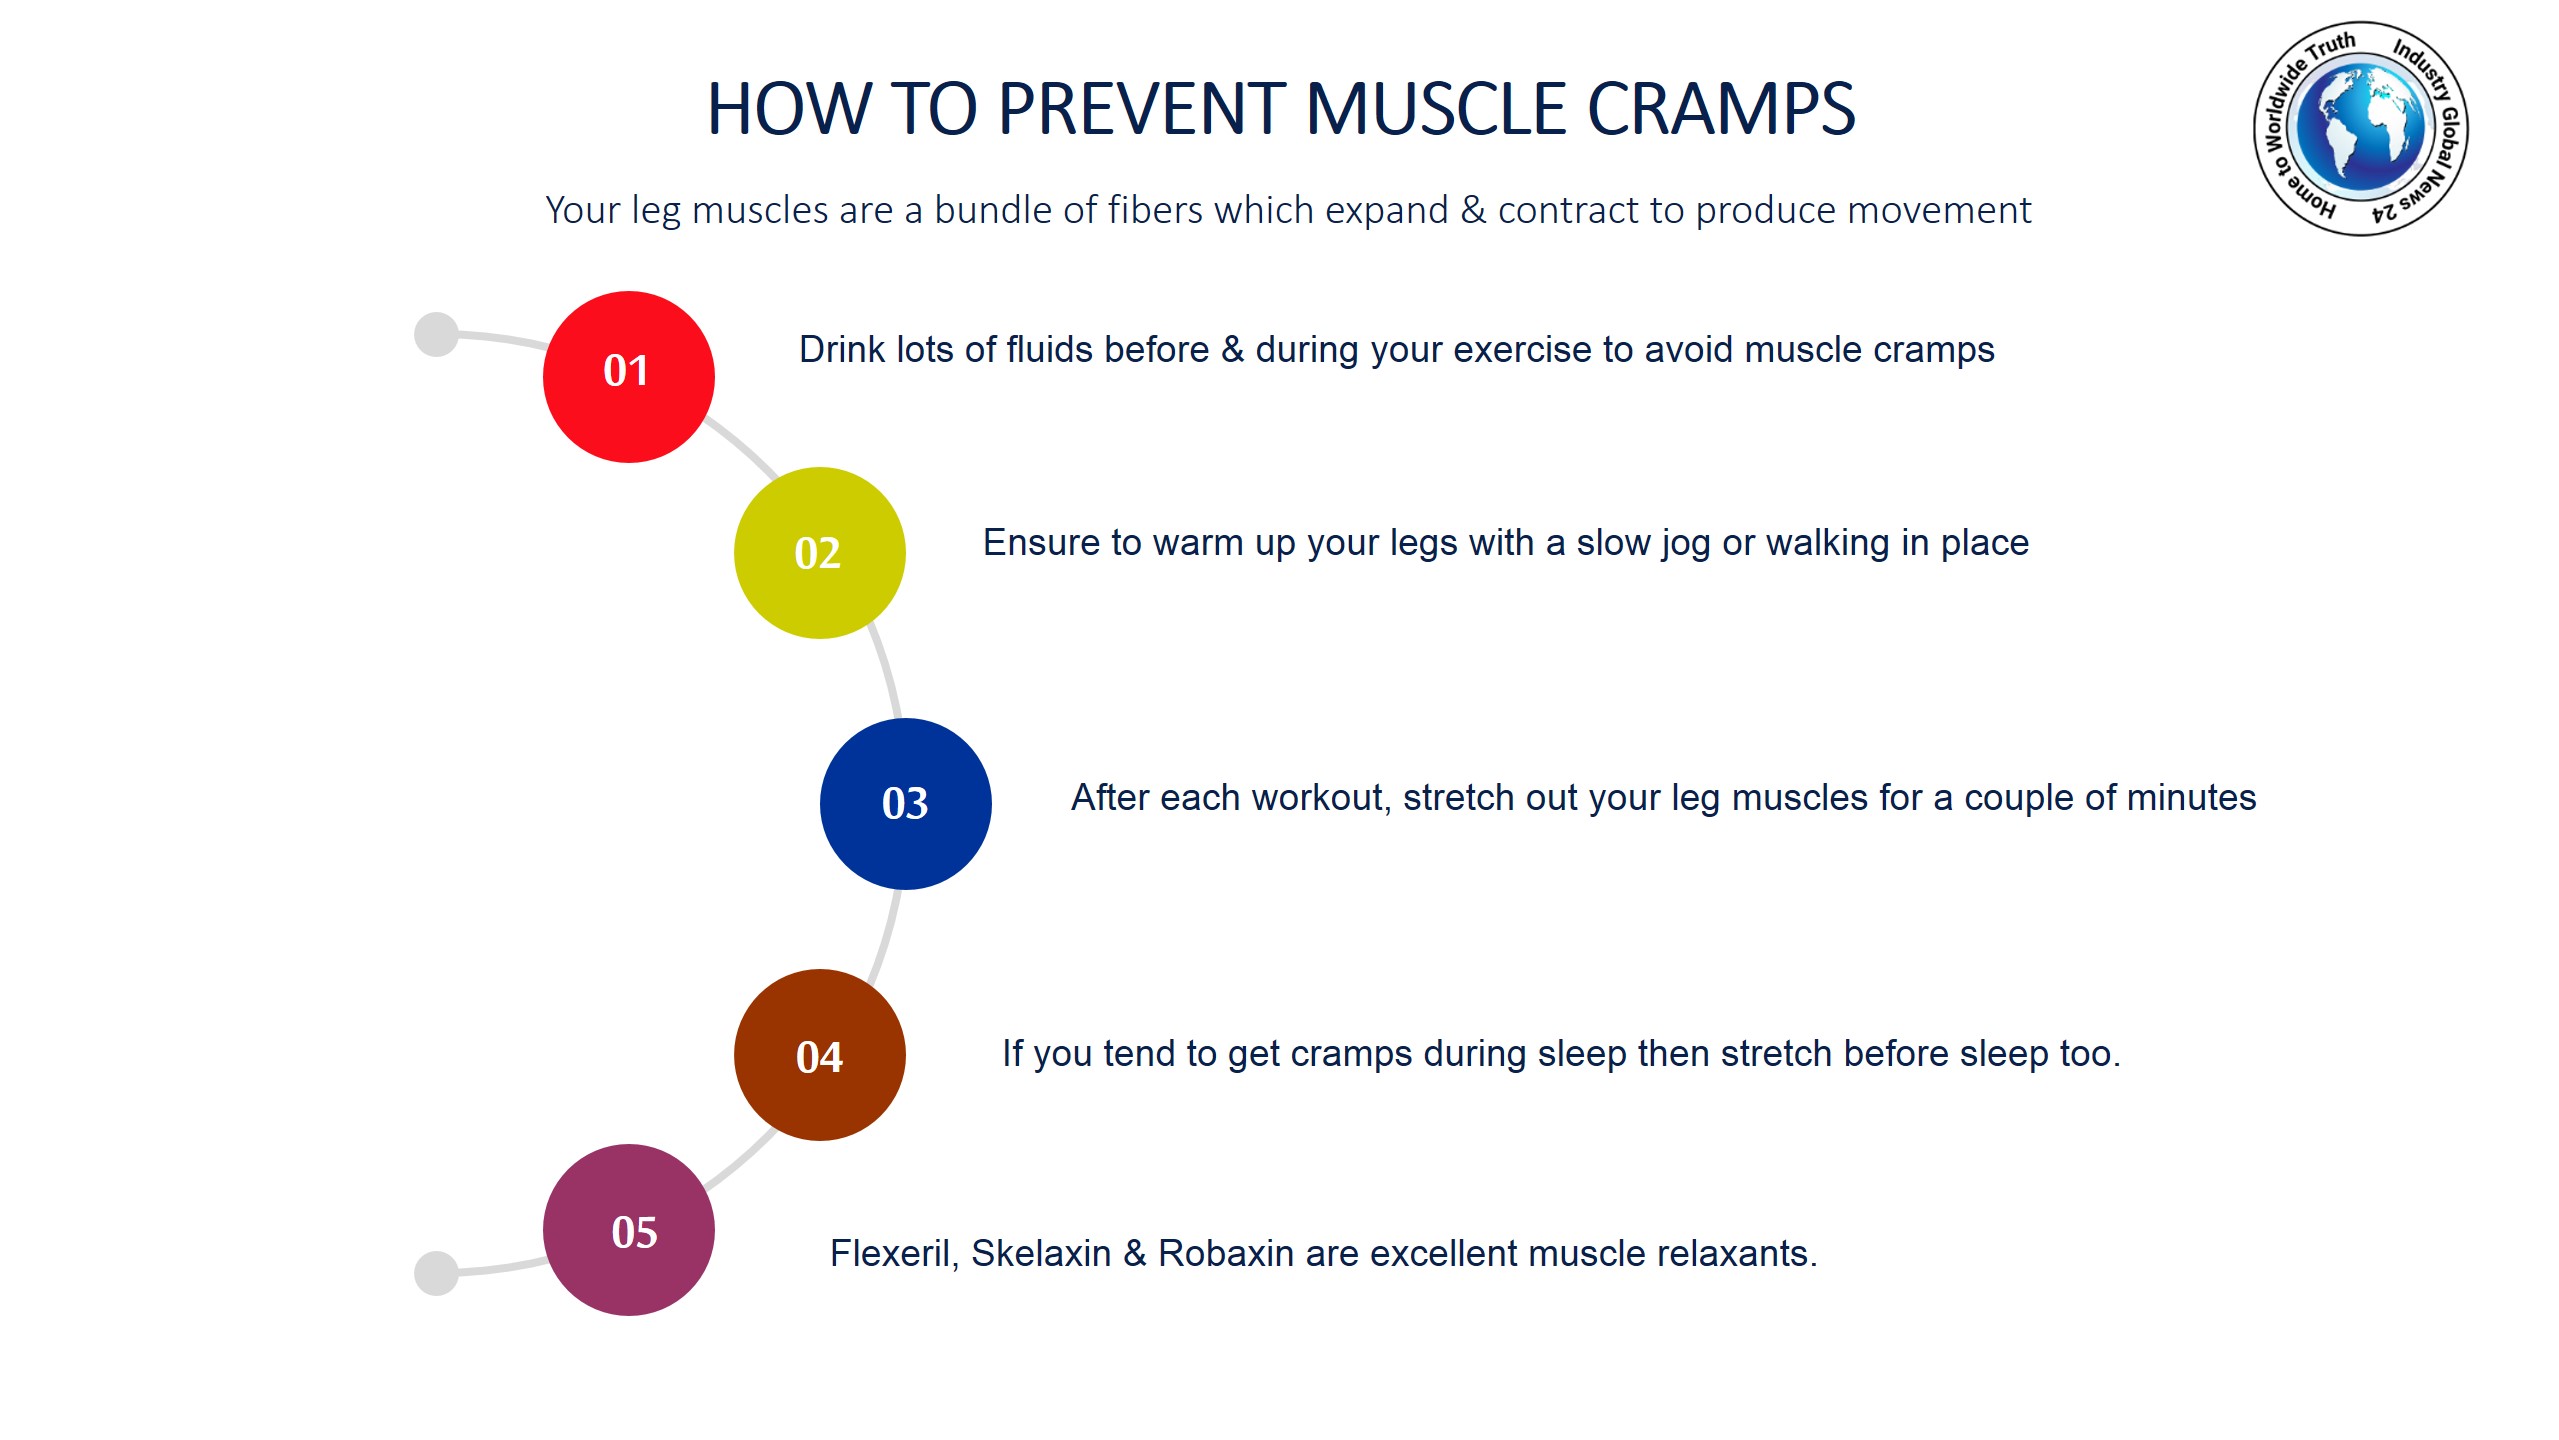 How to prevent muscle cramps